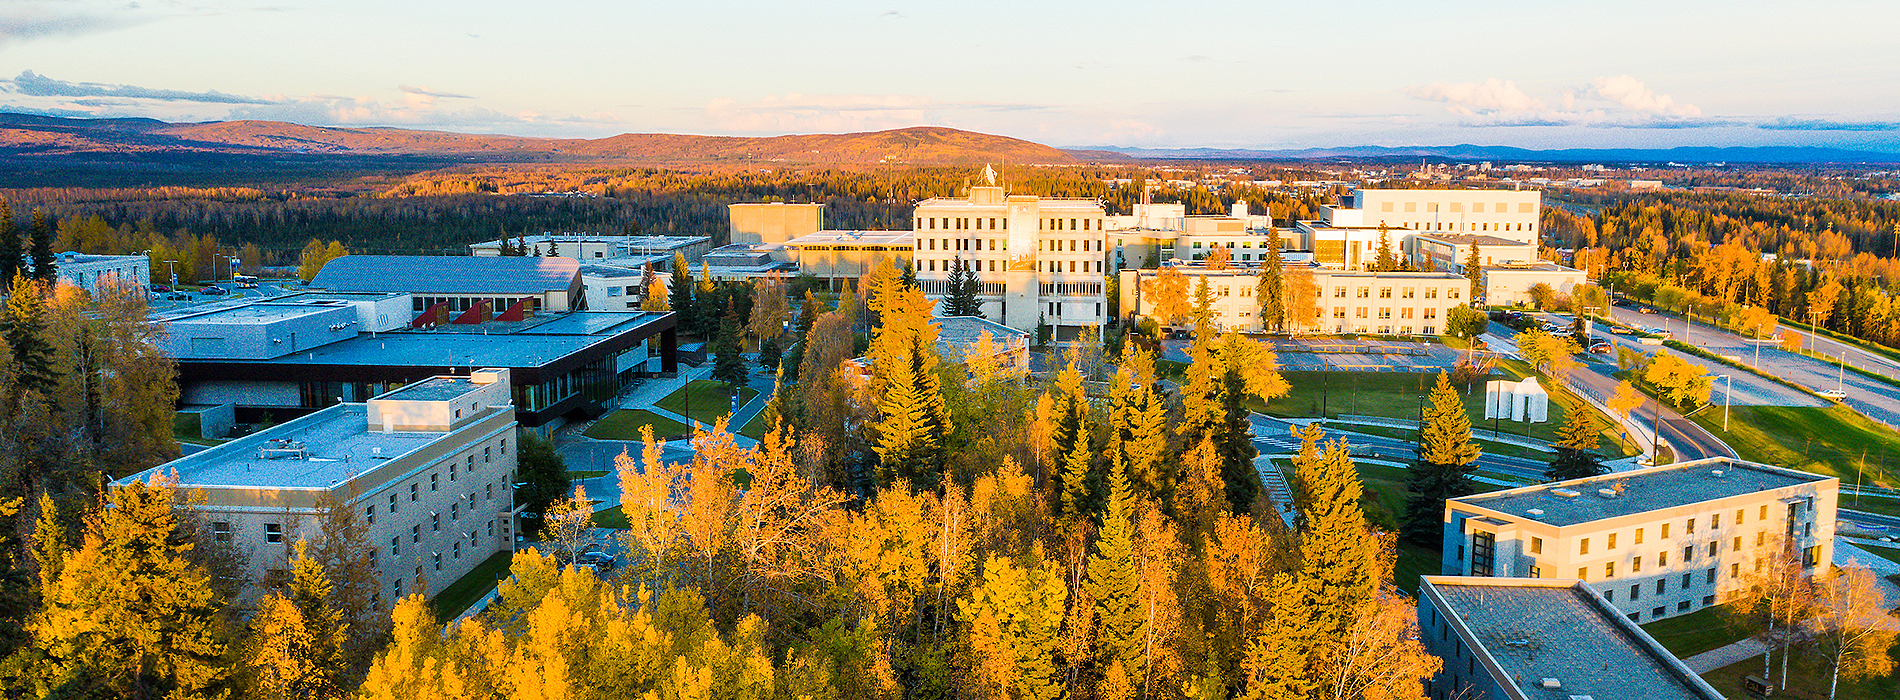 Aerial view of 51 Troth Yeddha campus in Fairbanks in autumn.